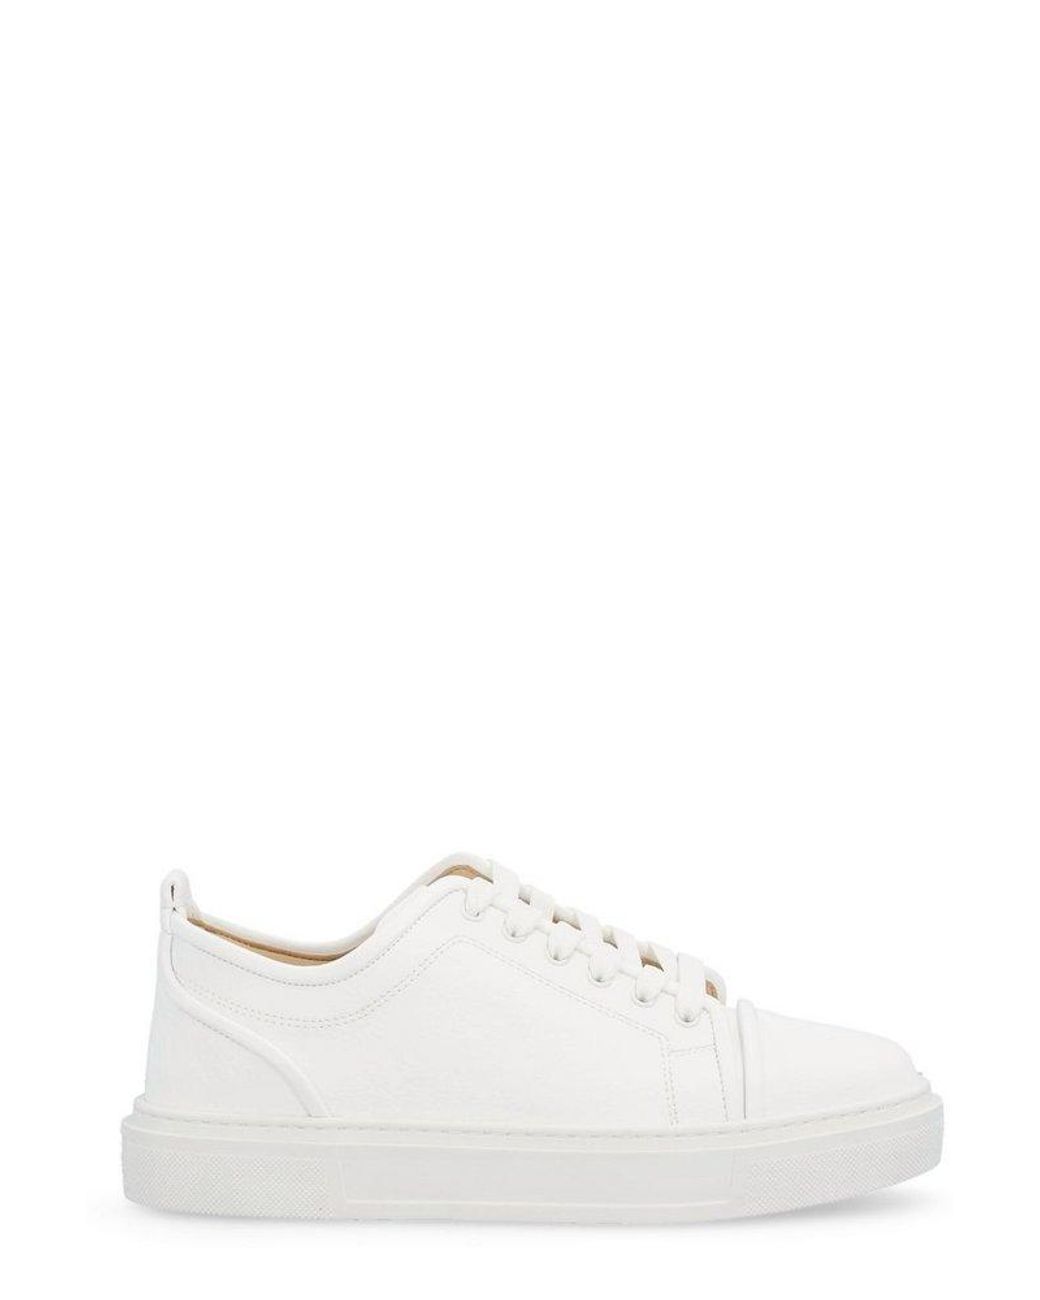 Christian Louboutin Adolon Junior Laced Low-top Sneakers in White for ...